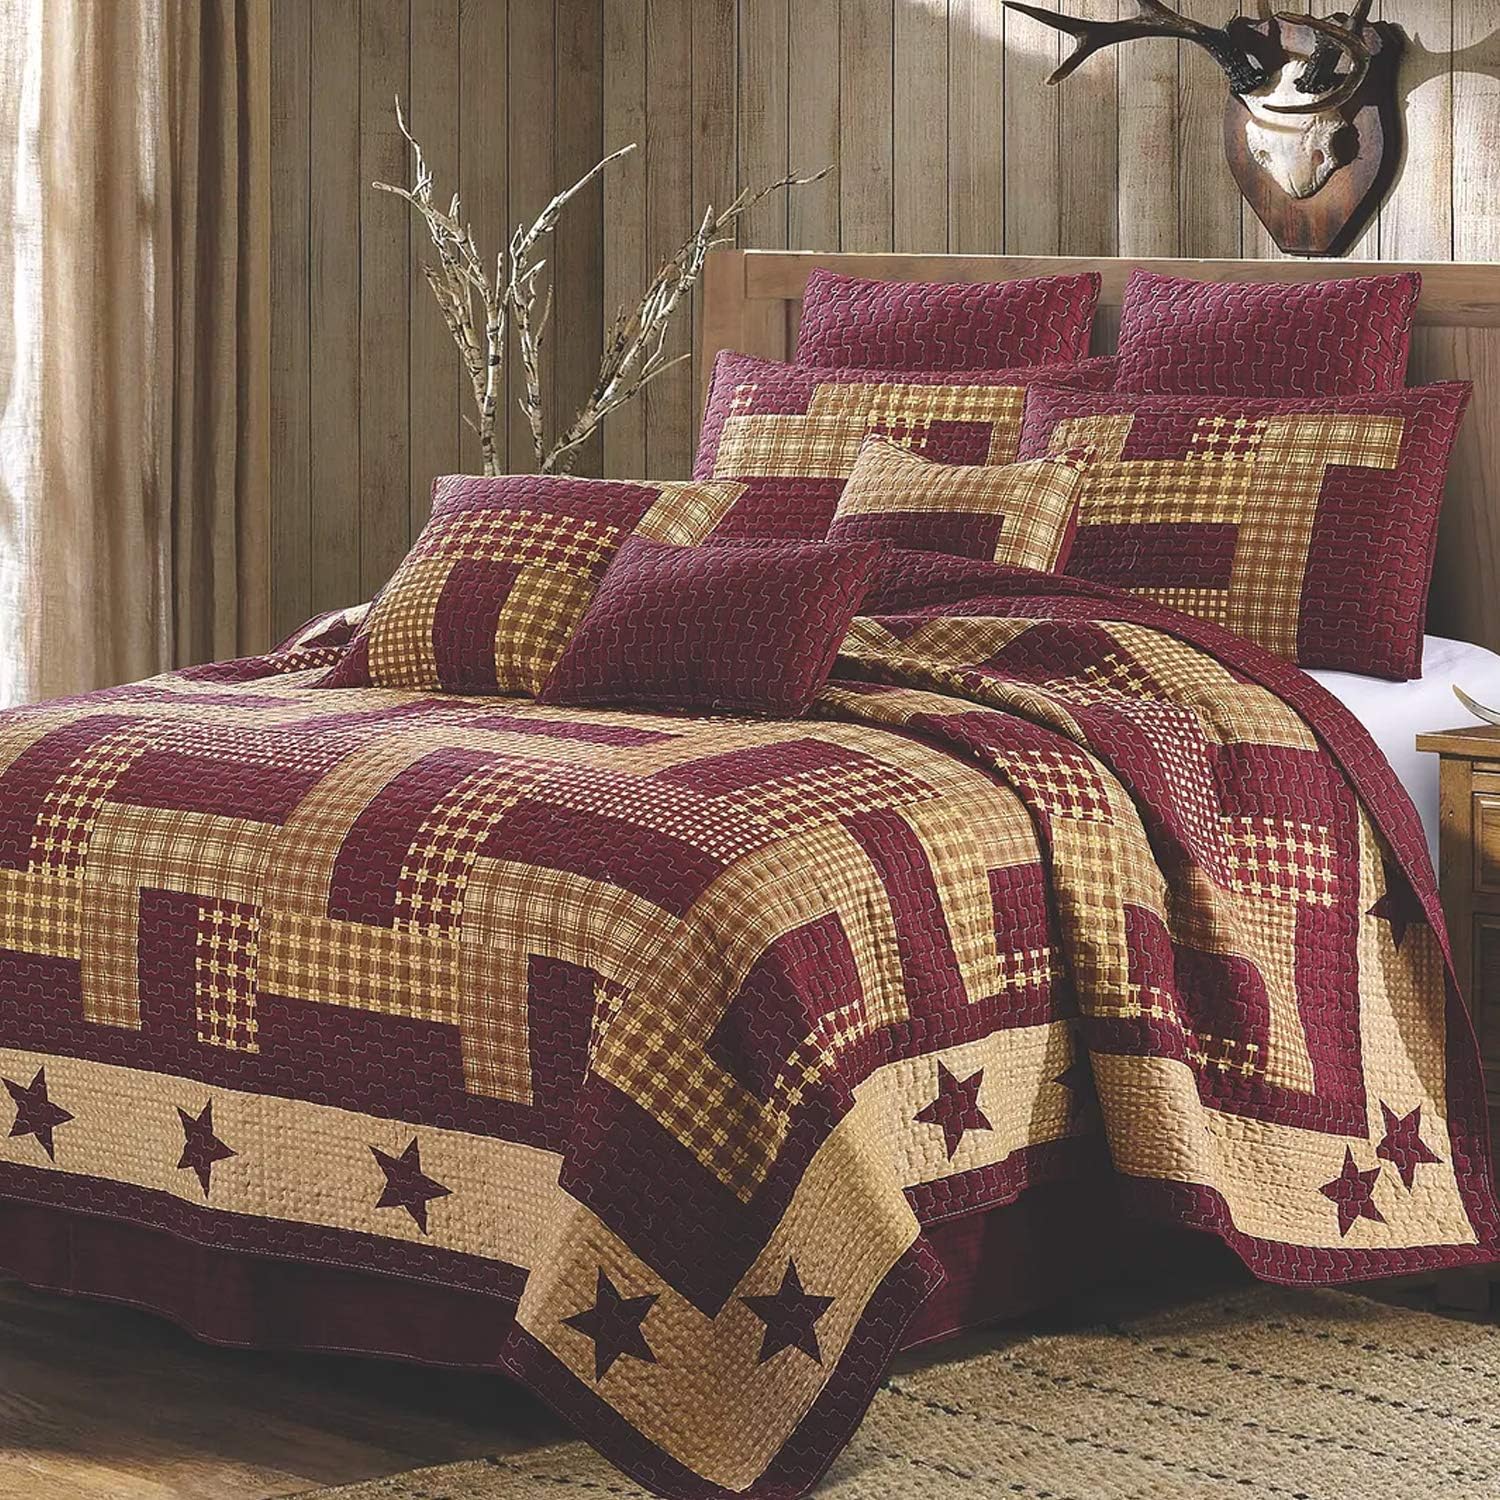 Virah Bella 3 Piece King Cabin Quilt Bedding Set - Homestead Red - Rustic Country Reversible Patchwork Comforter Set with Decorative Pillow Shams